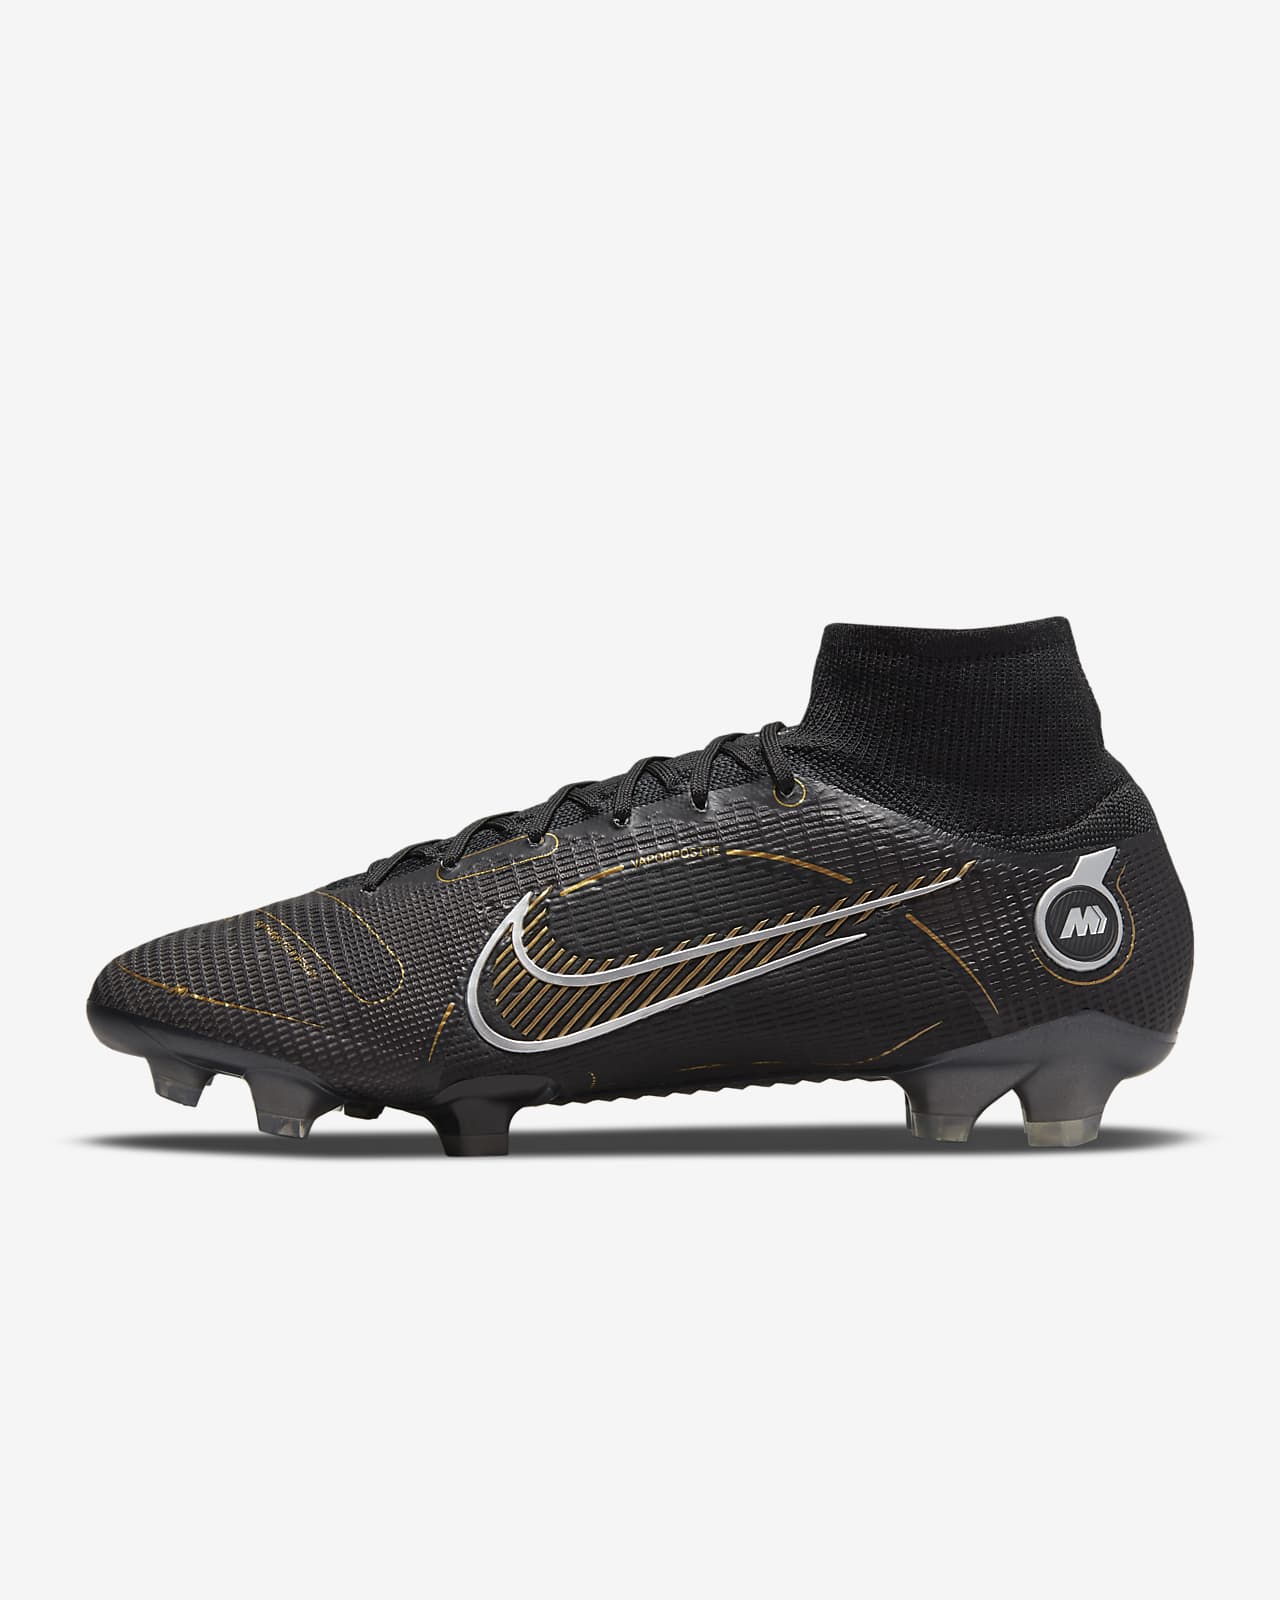 Nike Mercurial Superfly 8 Elite FG Firm-Ground Soccer Cleats